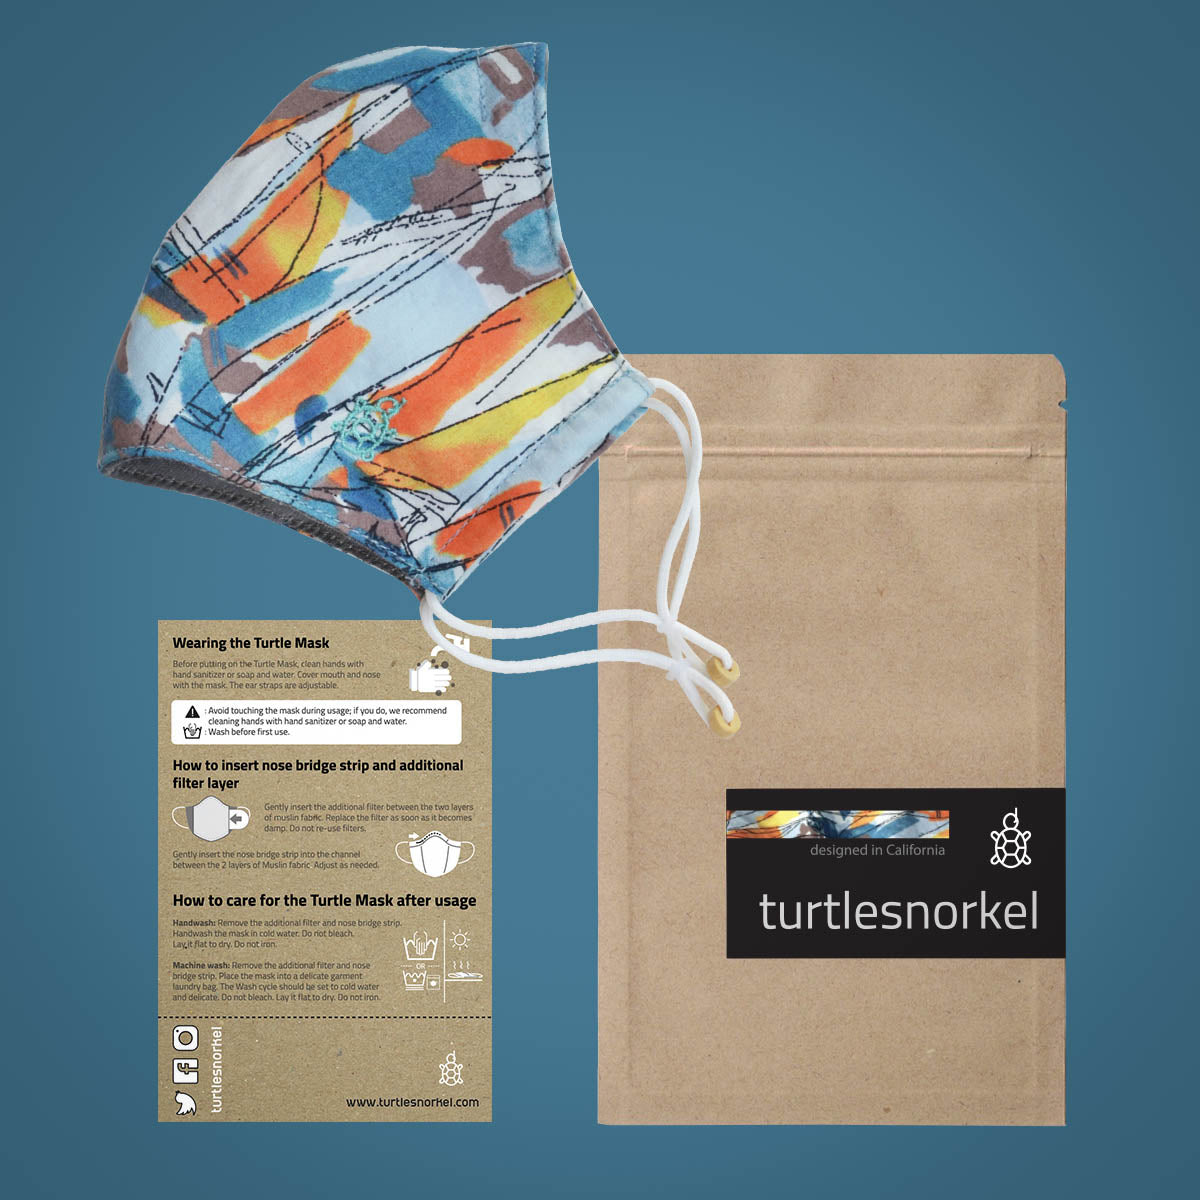 Turtle Mask 2.1 Summer Sunset - Limited Edition  The inner layer is constructed with the same lightweight muslin cotton that helps reduce skin irritations and provide breathability. The special inner sleeve pocket houses insertable filters that help reduce symptoms from dust, air pollution, allergies and other airborne contaminants.   The mask's outer layer comes in various styles and patterns, making it fun and fashionable.